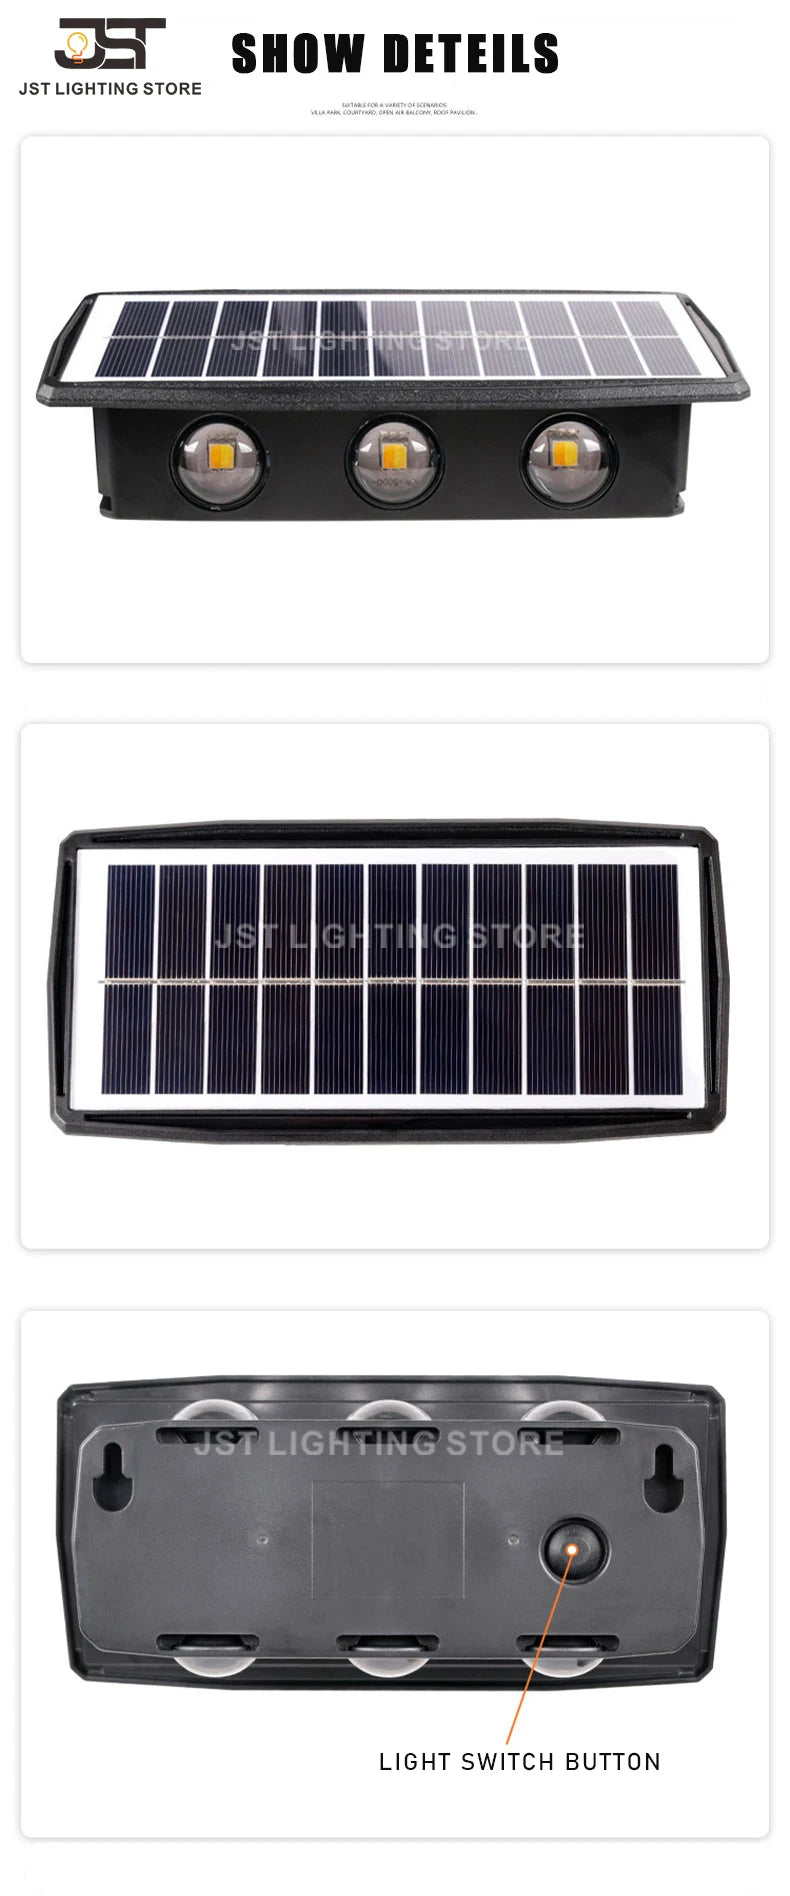 Solar LED Wall Light, Plug-and-play solar LED light requires no wiring, providing instant lighting.